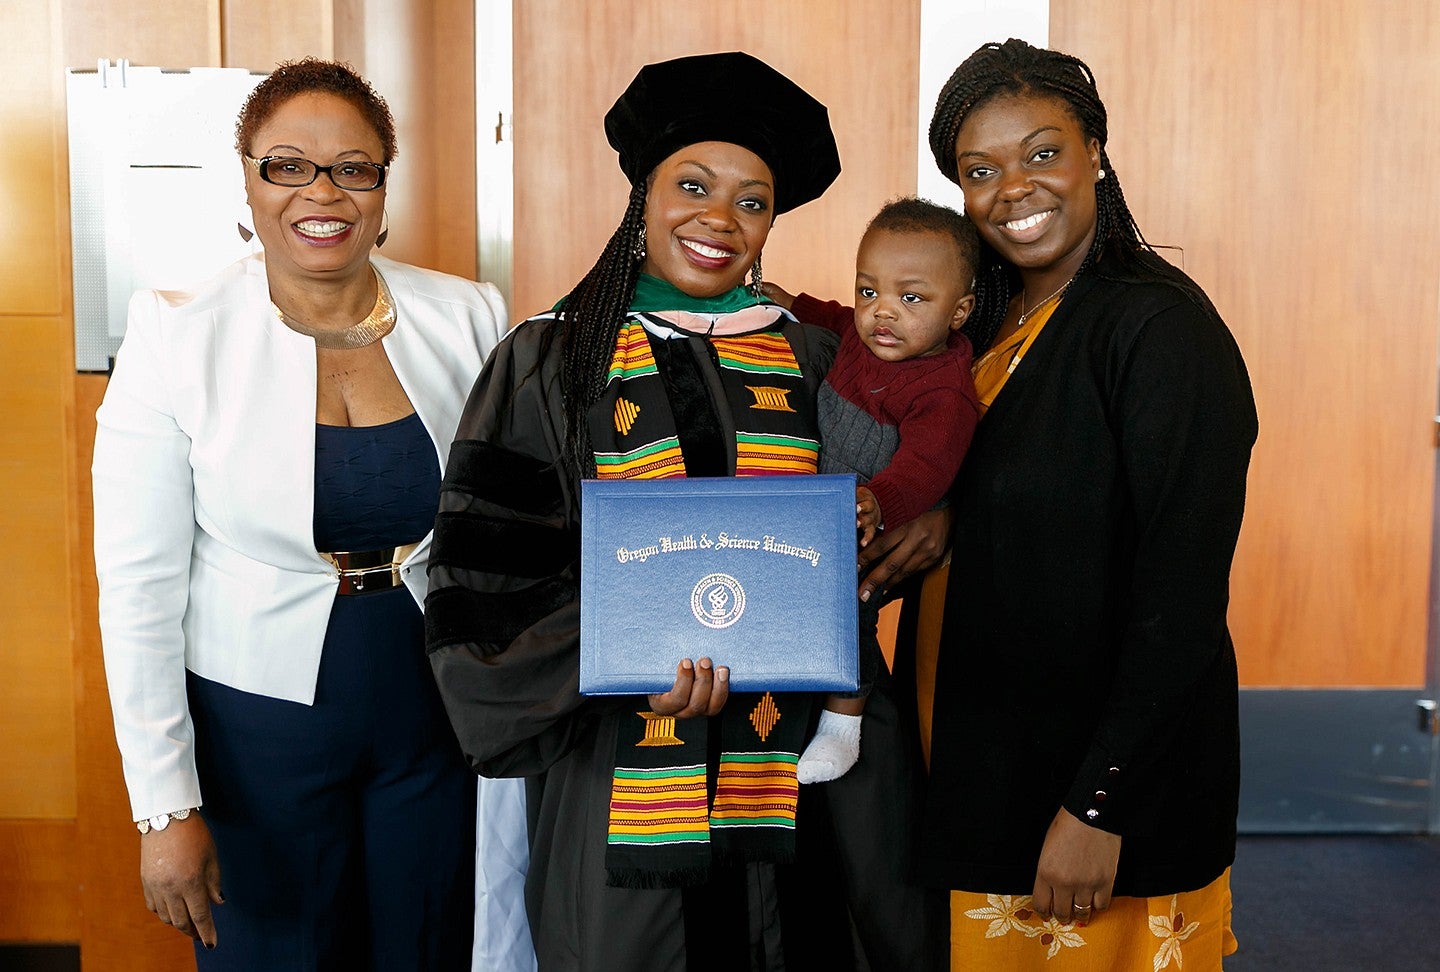 ann oluloro in regalia at her graduation from OHSU posing with her mother, sister snd nephew 